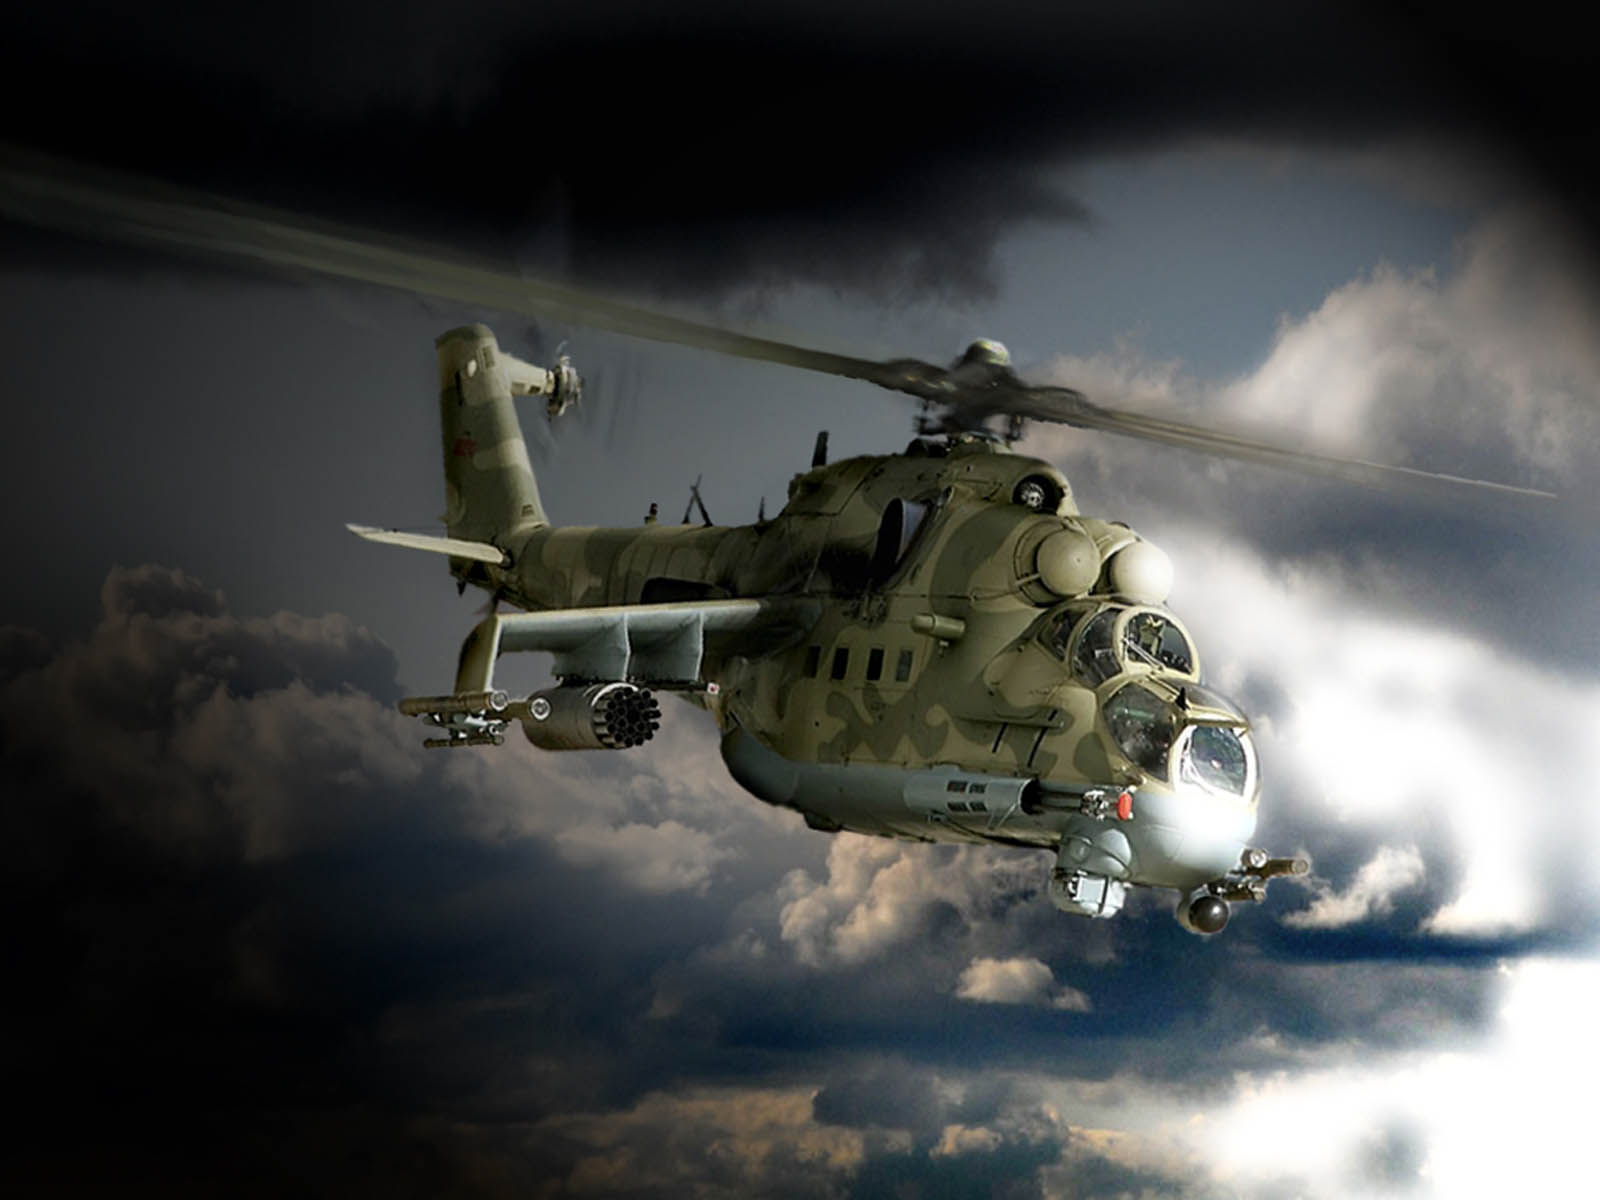 Tag mi 24 Hind Helicopter Wallpapers Backgrounds Paos Pictures